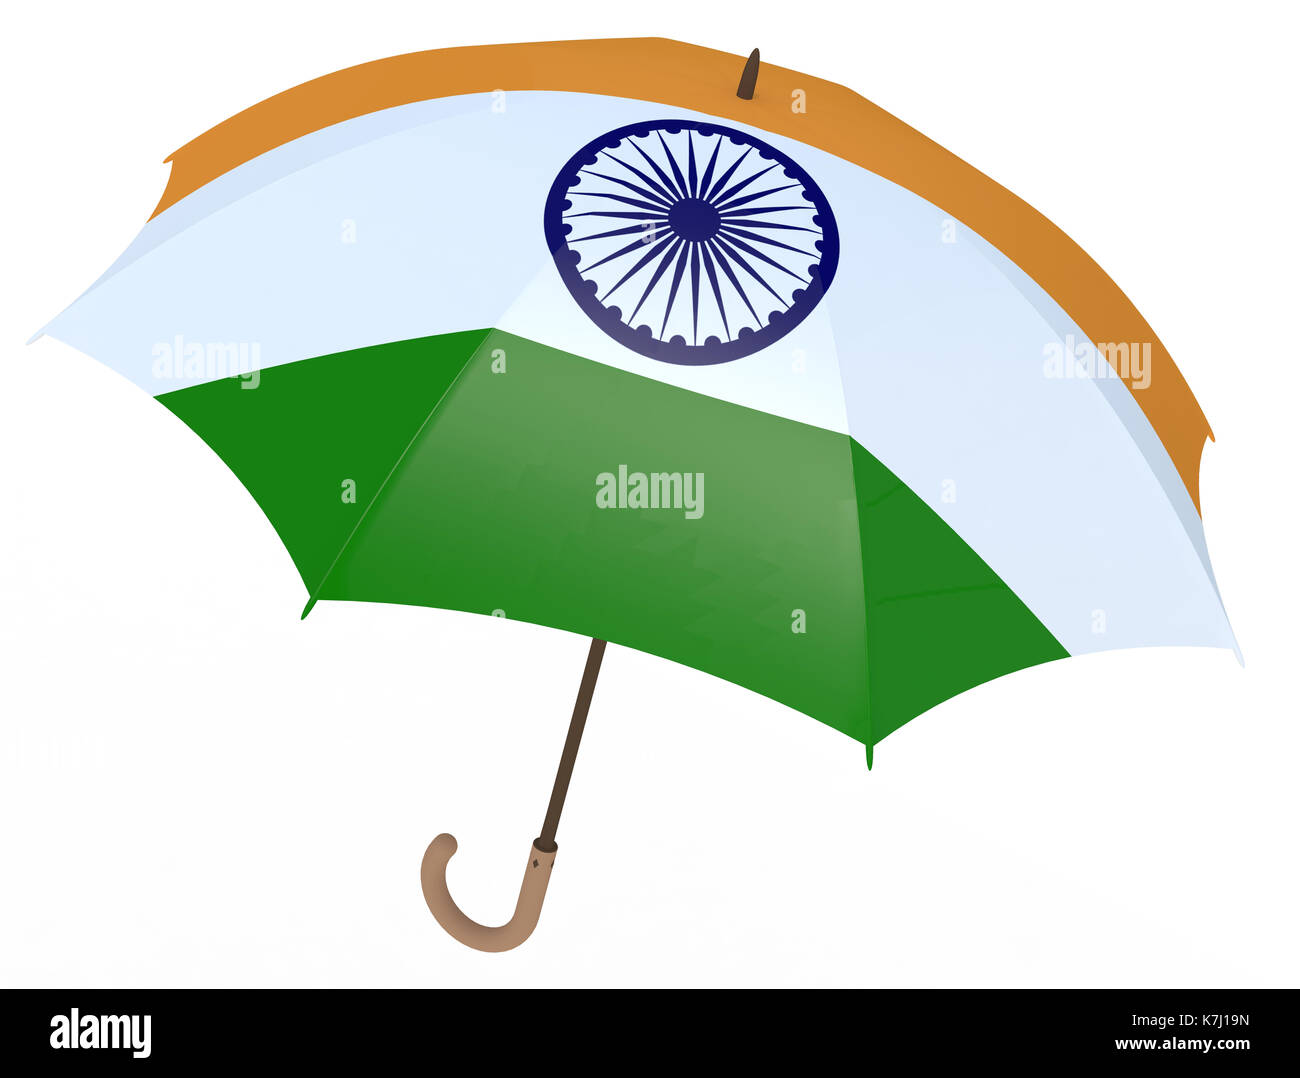 Umbrella with flag of India isolated on white 3D illustration